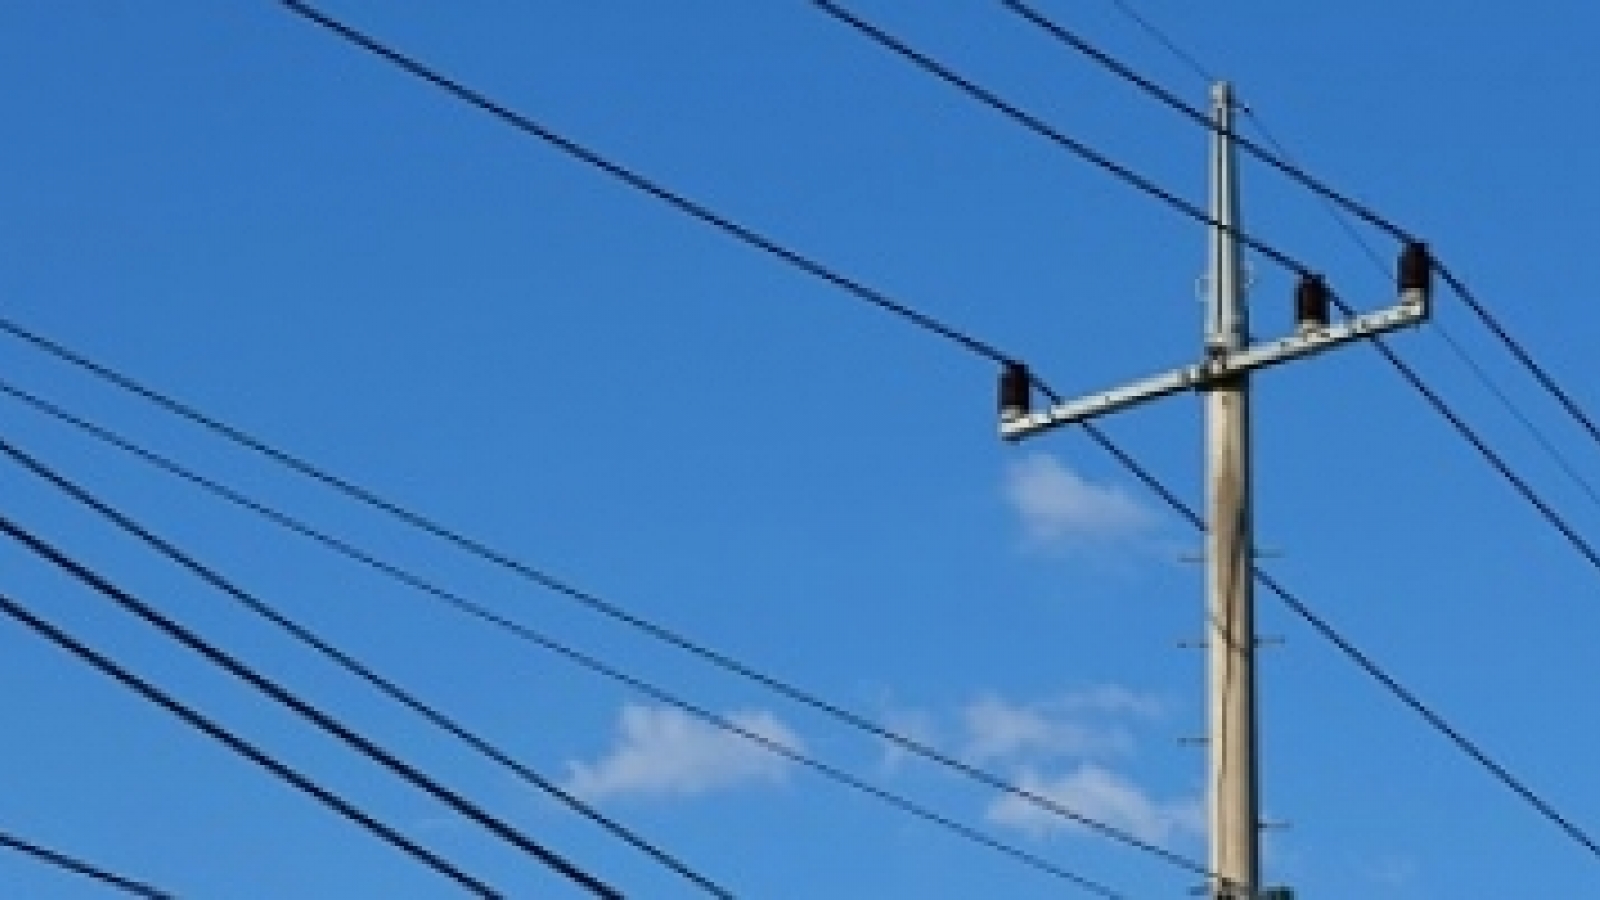 utility pole with power lines against a blue sky